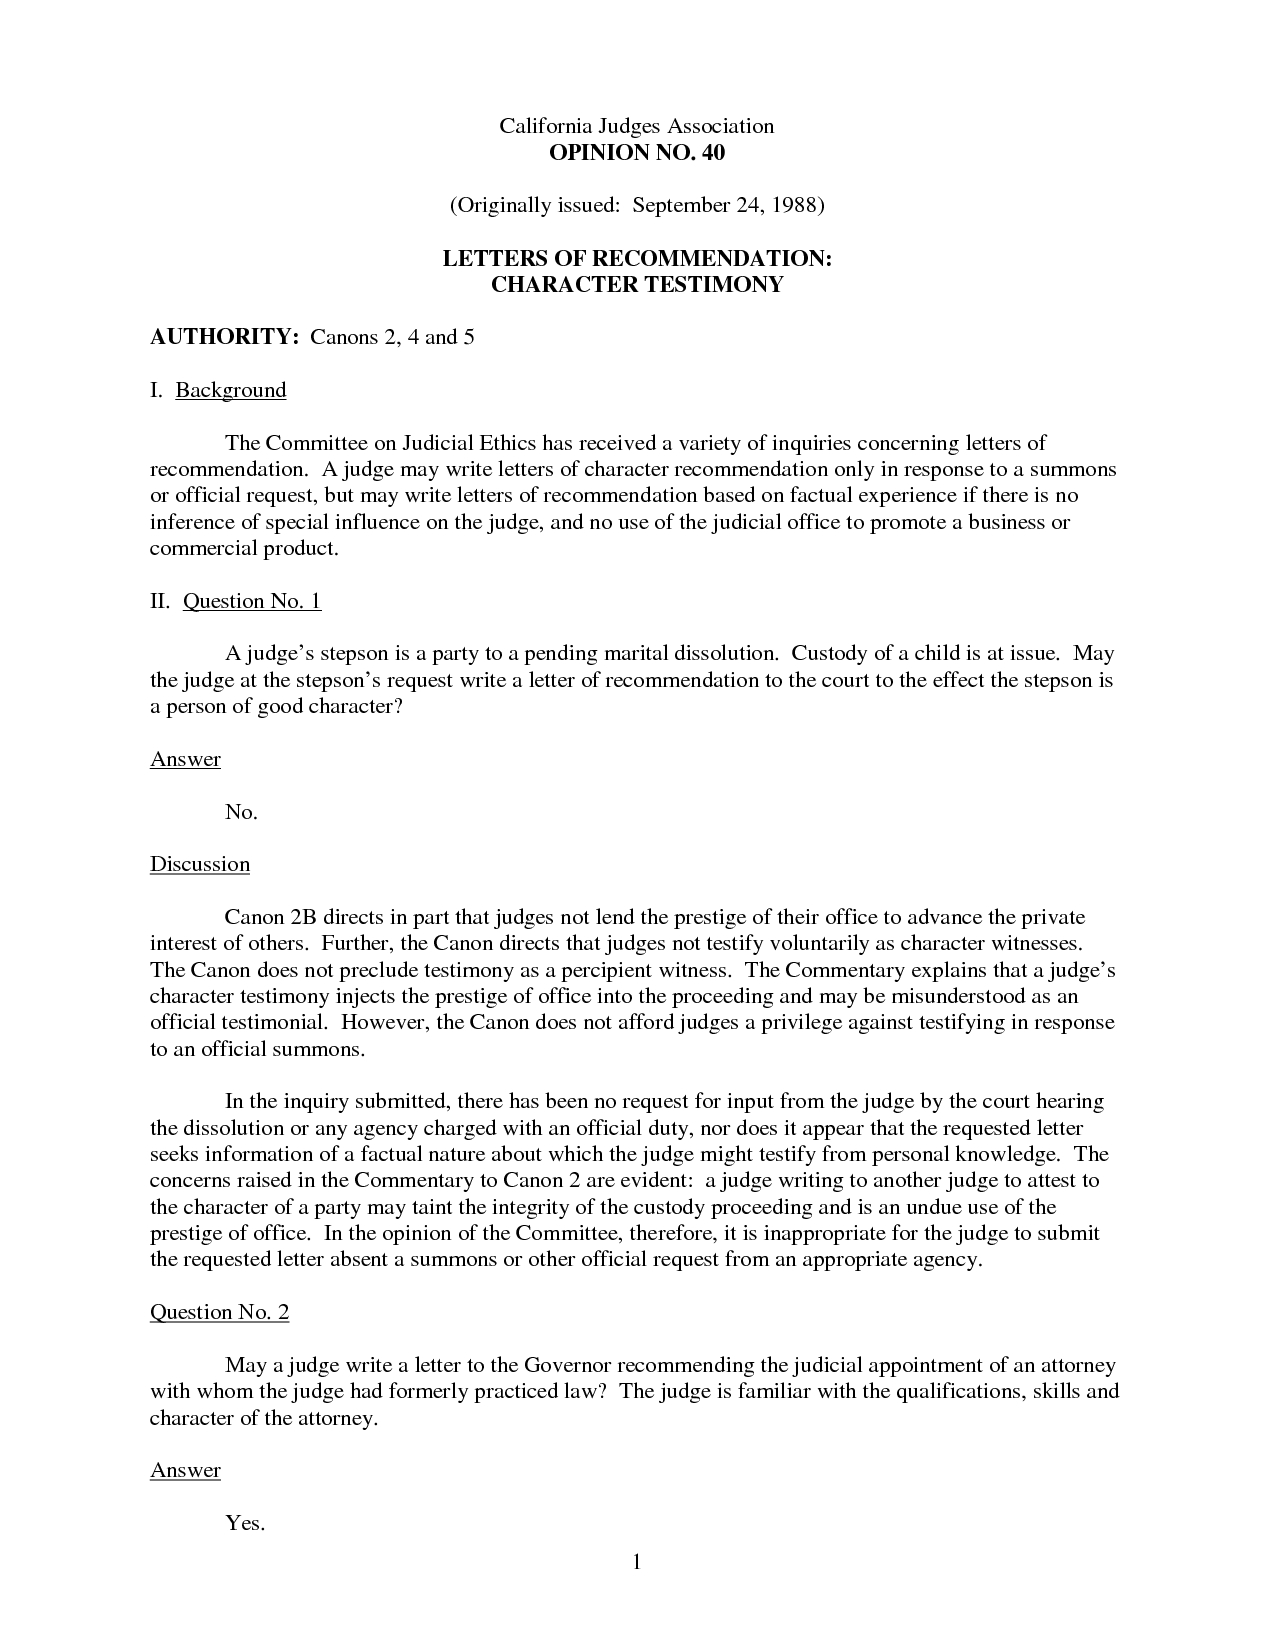 Court Reference Letter Template - Example Character Reference Letter for Court Appearance Choice